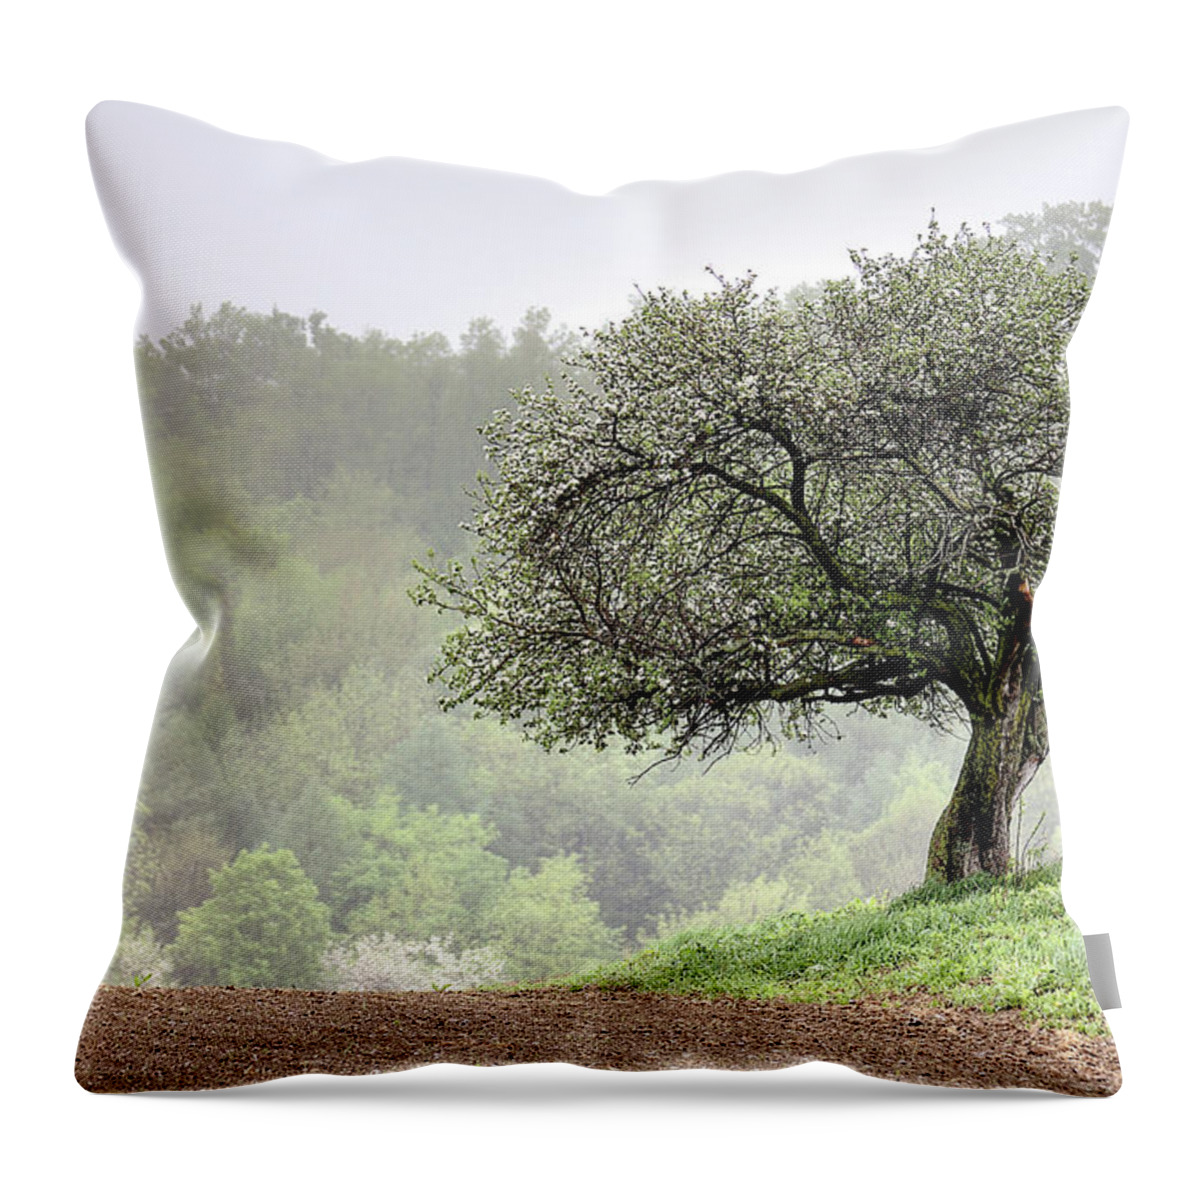 Trees Throw Pillow featuring the photograph Marilla Tree by Don Nieman